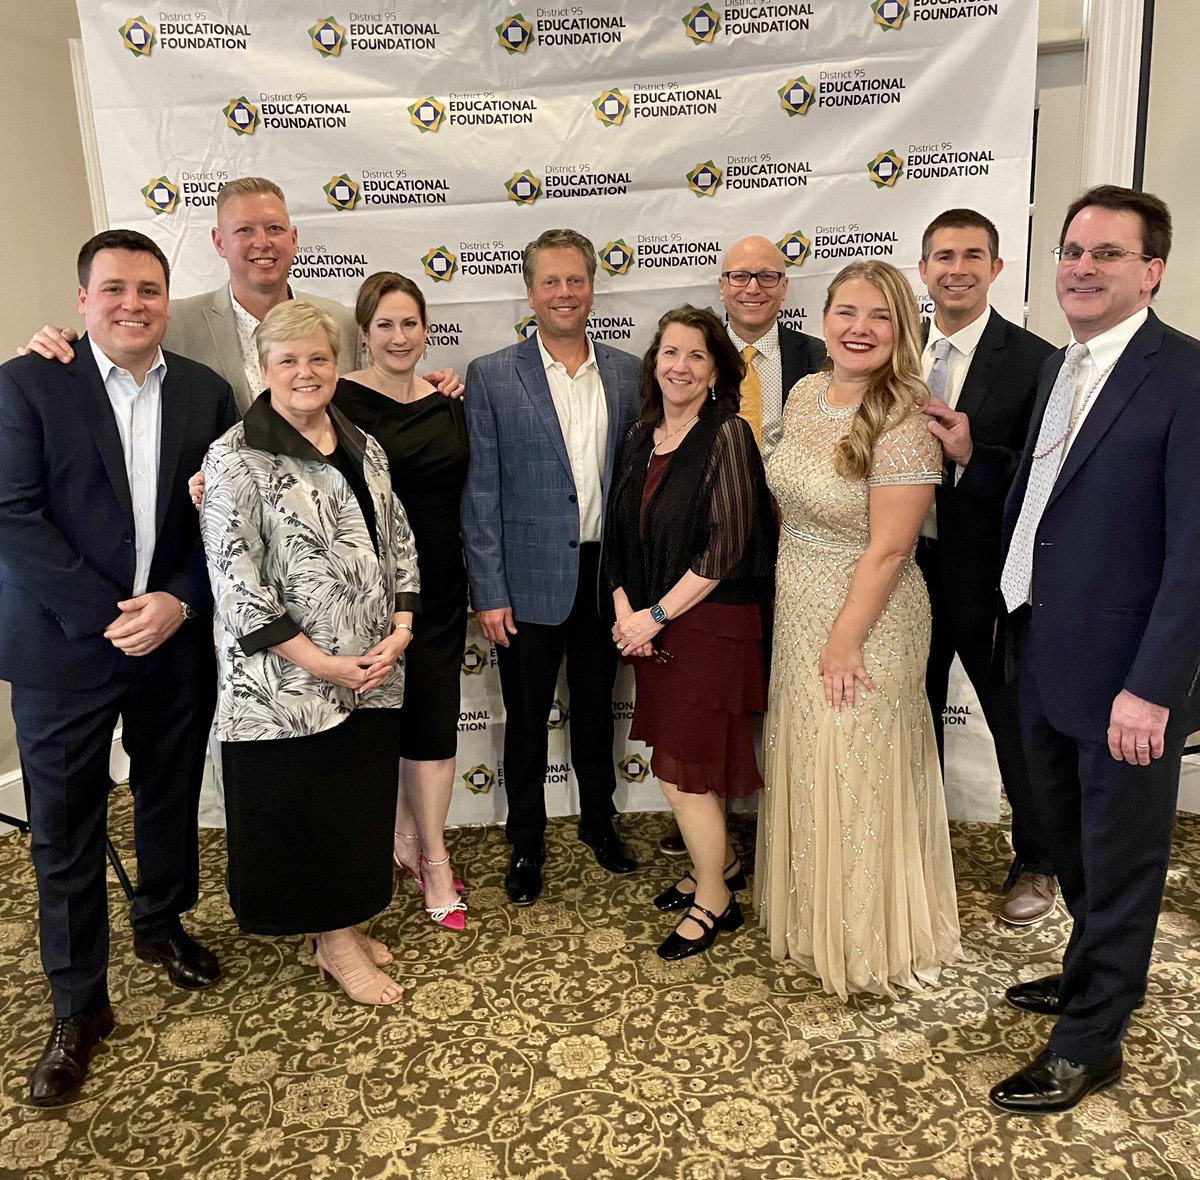 On behalf of the District 95 Educational Foundation trustees, we want to thank attendees, sponsors, and donors of the Springtime in Paris Gala for an amazing night celebrating the work of the Foundation’s educational initiatives, and raising funds for our programs. More to come!